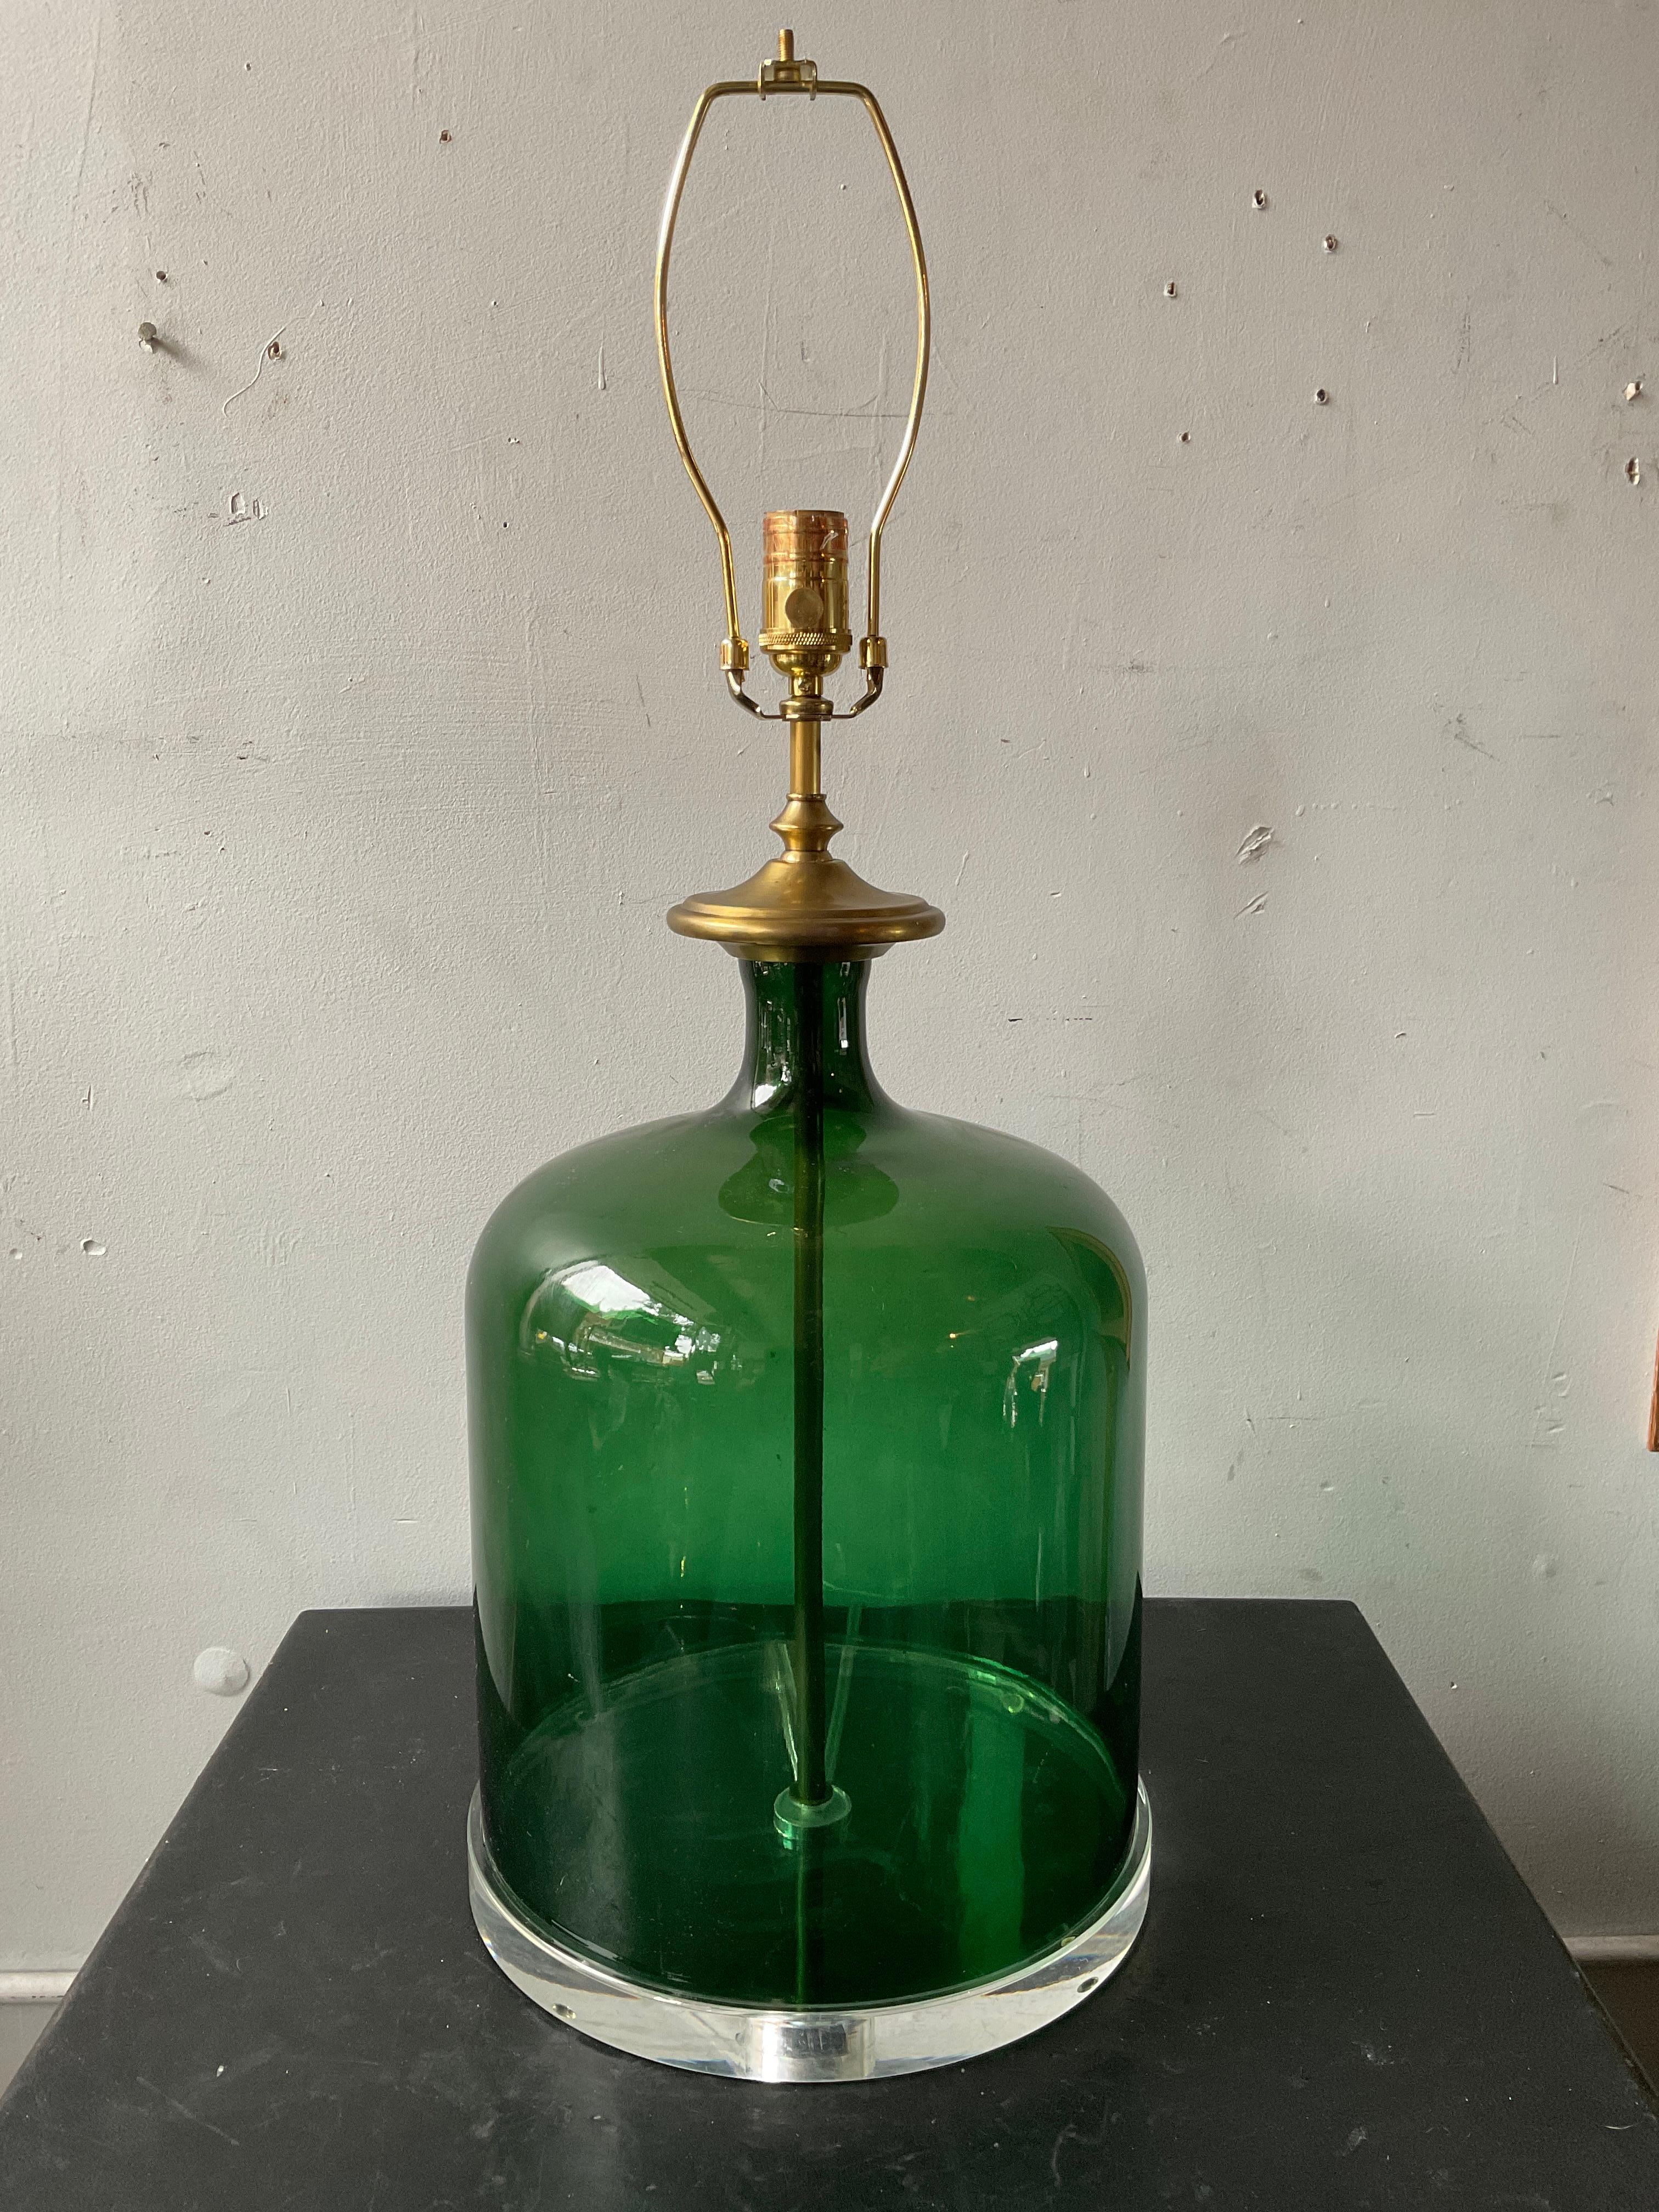 2010 Green glass on lucite base lamp. Has original wiring, needs rewiring. Has a few spots where the glass is cloudy as shown in the last 2 pictures.
Height is to top of socket.